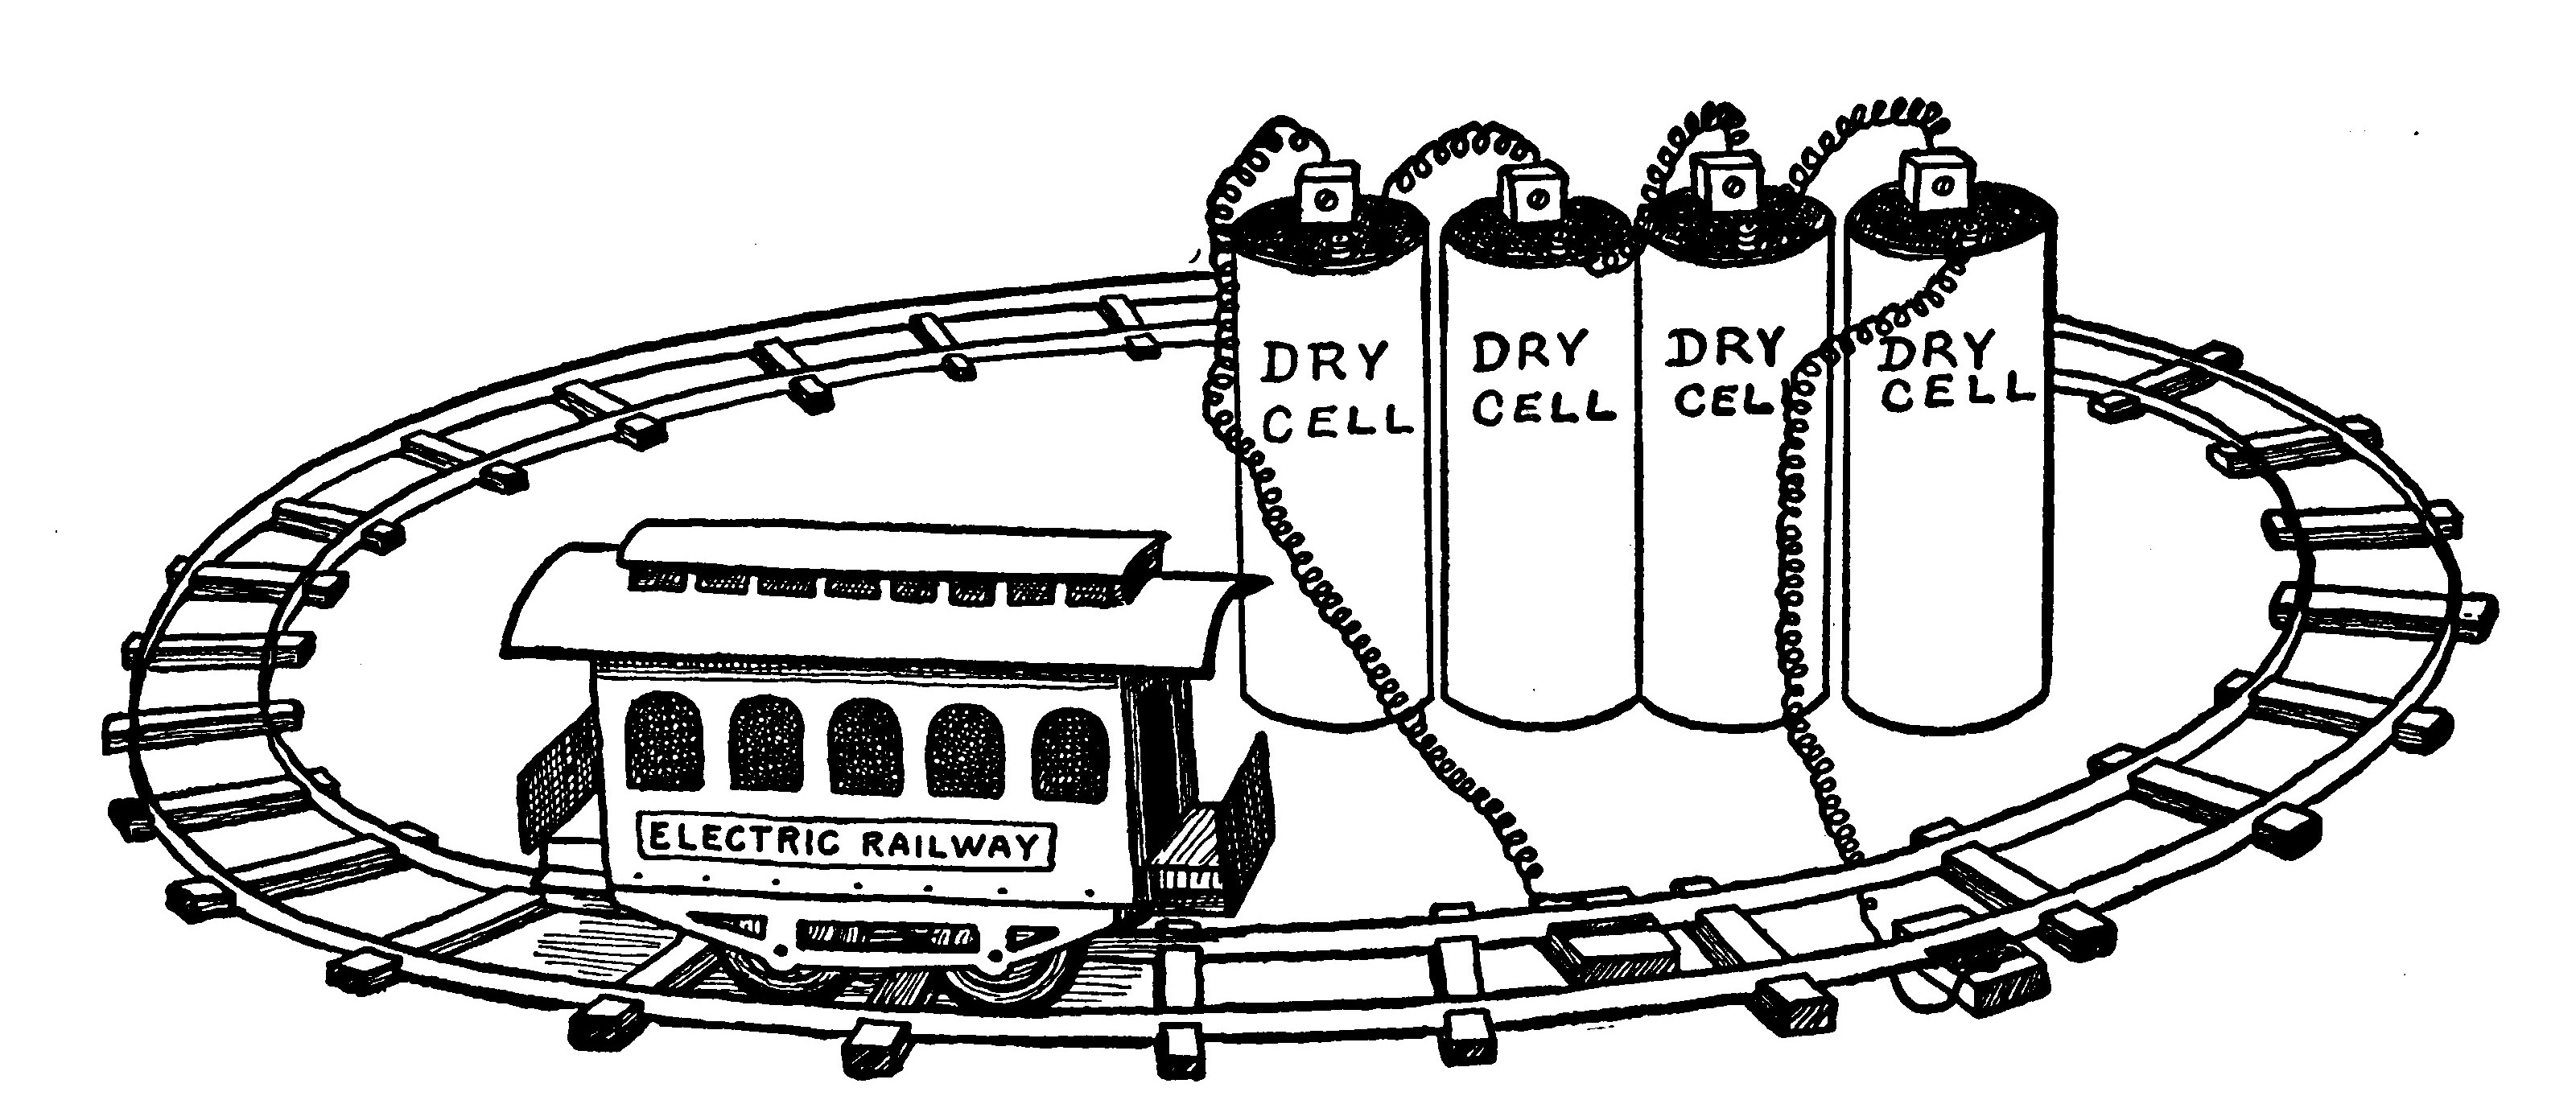 Fig. 263.—Complete Electric Railway operated by Dry Cells.